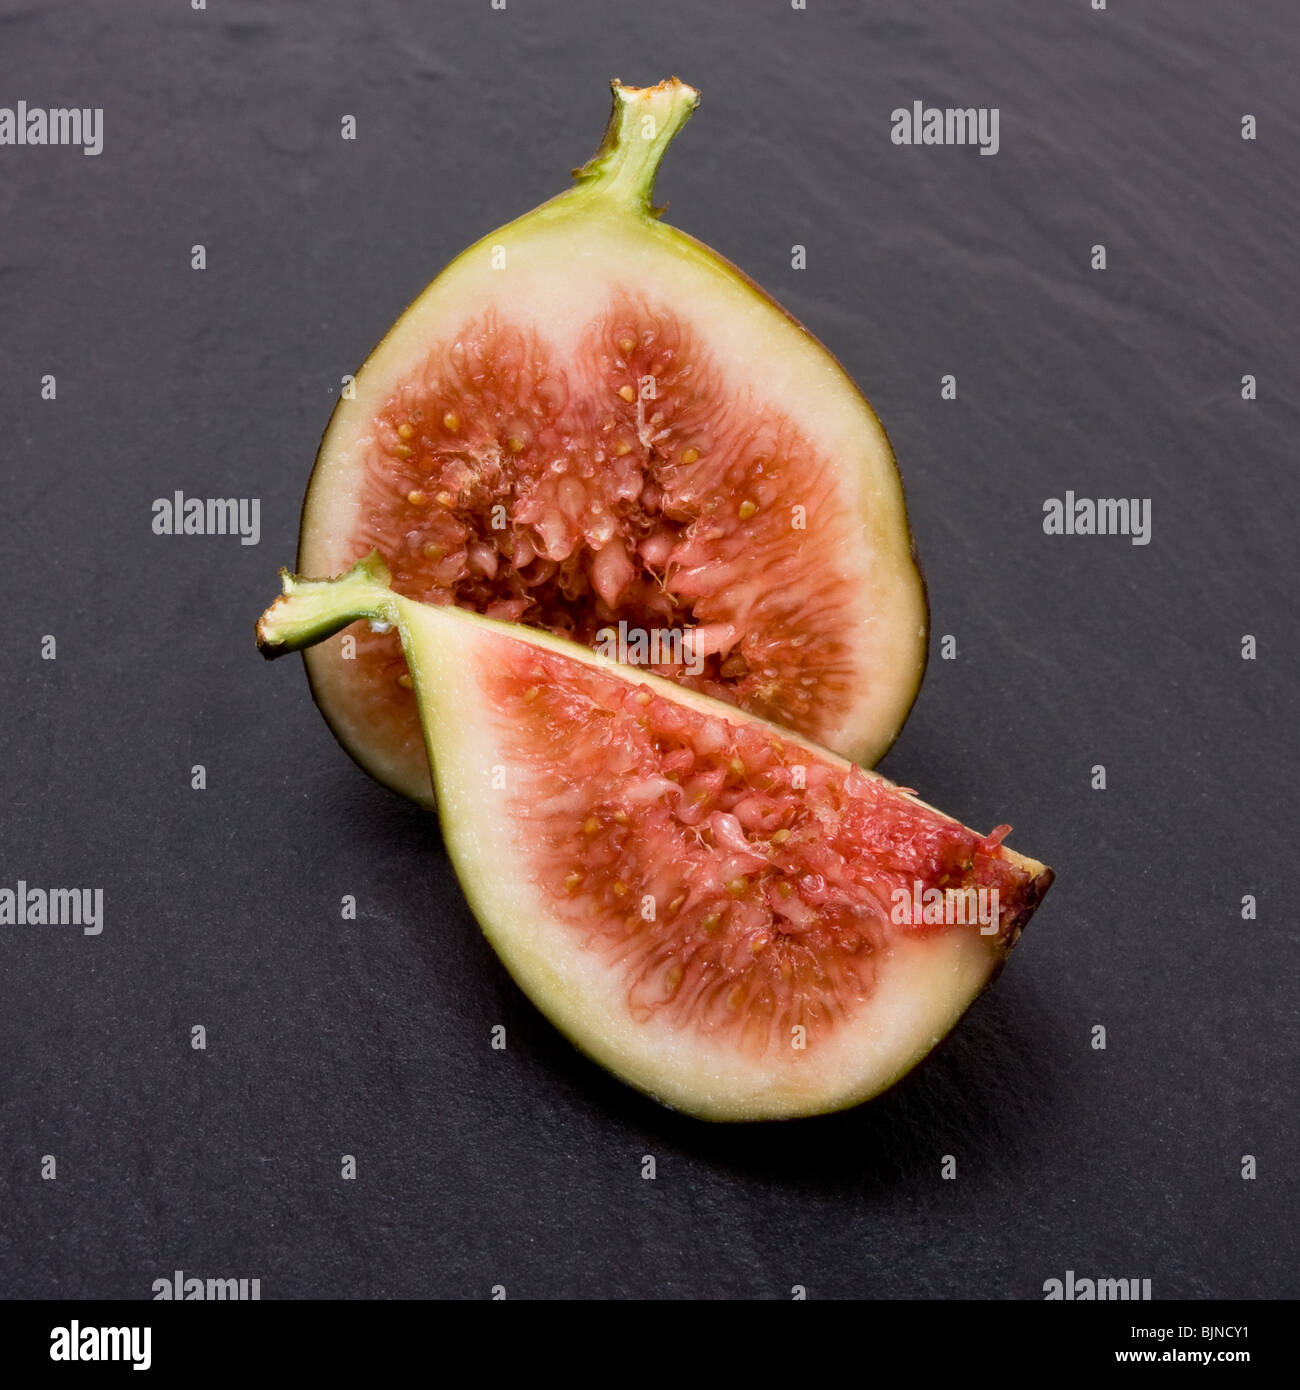 Sliced ripe figs from low viewpoint isolated against dark slate background. Stock Photo